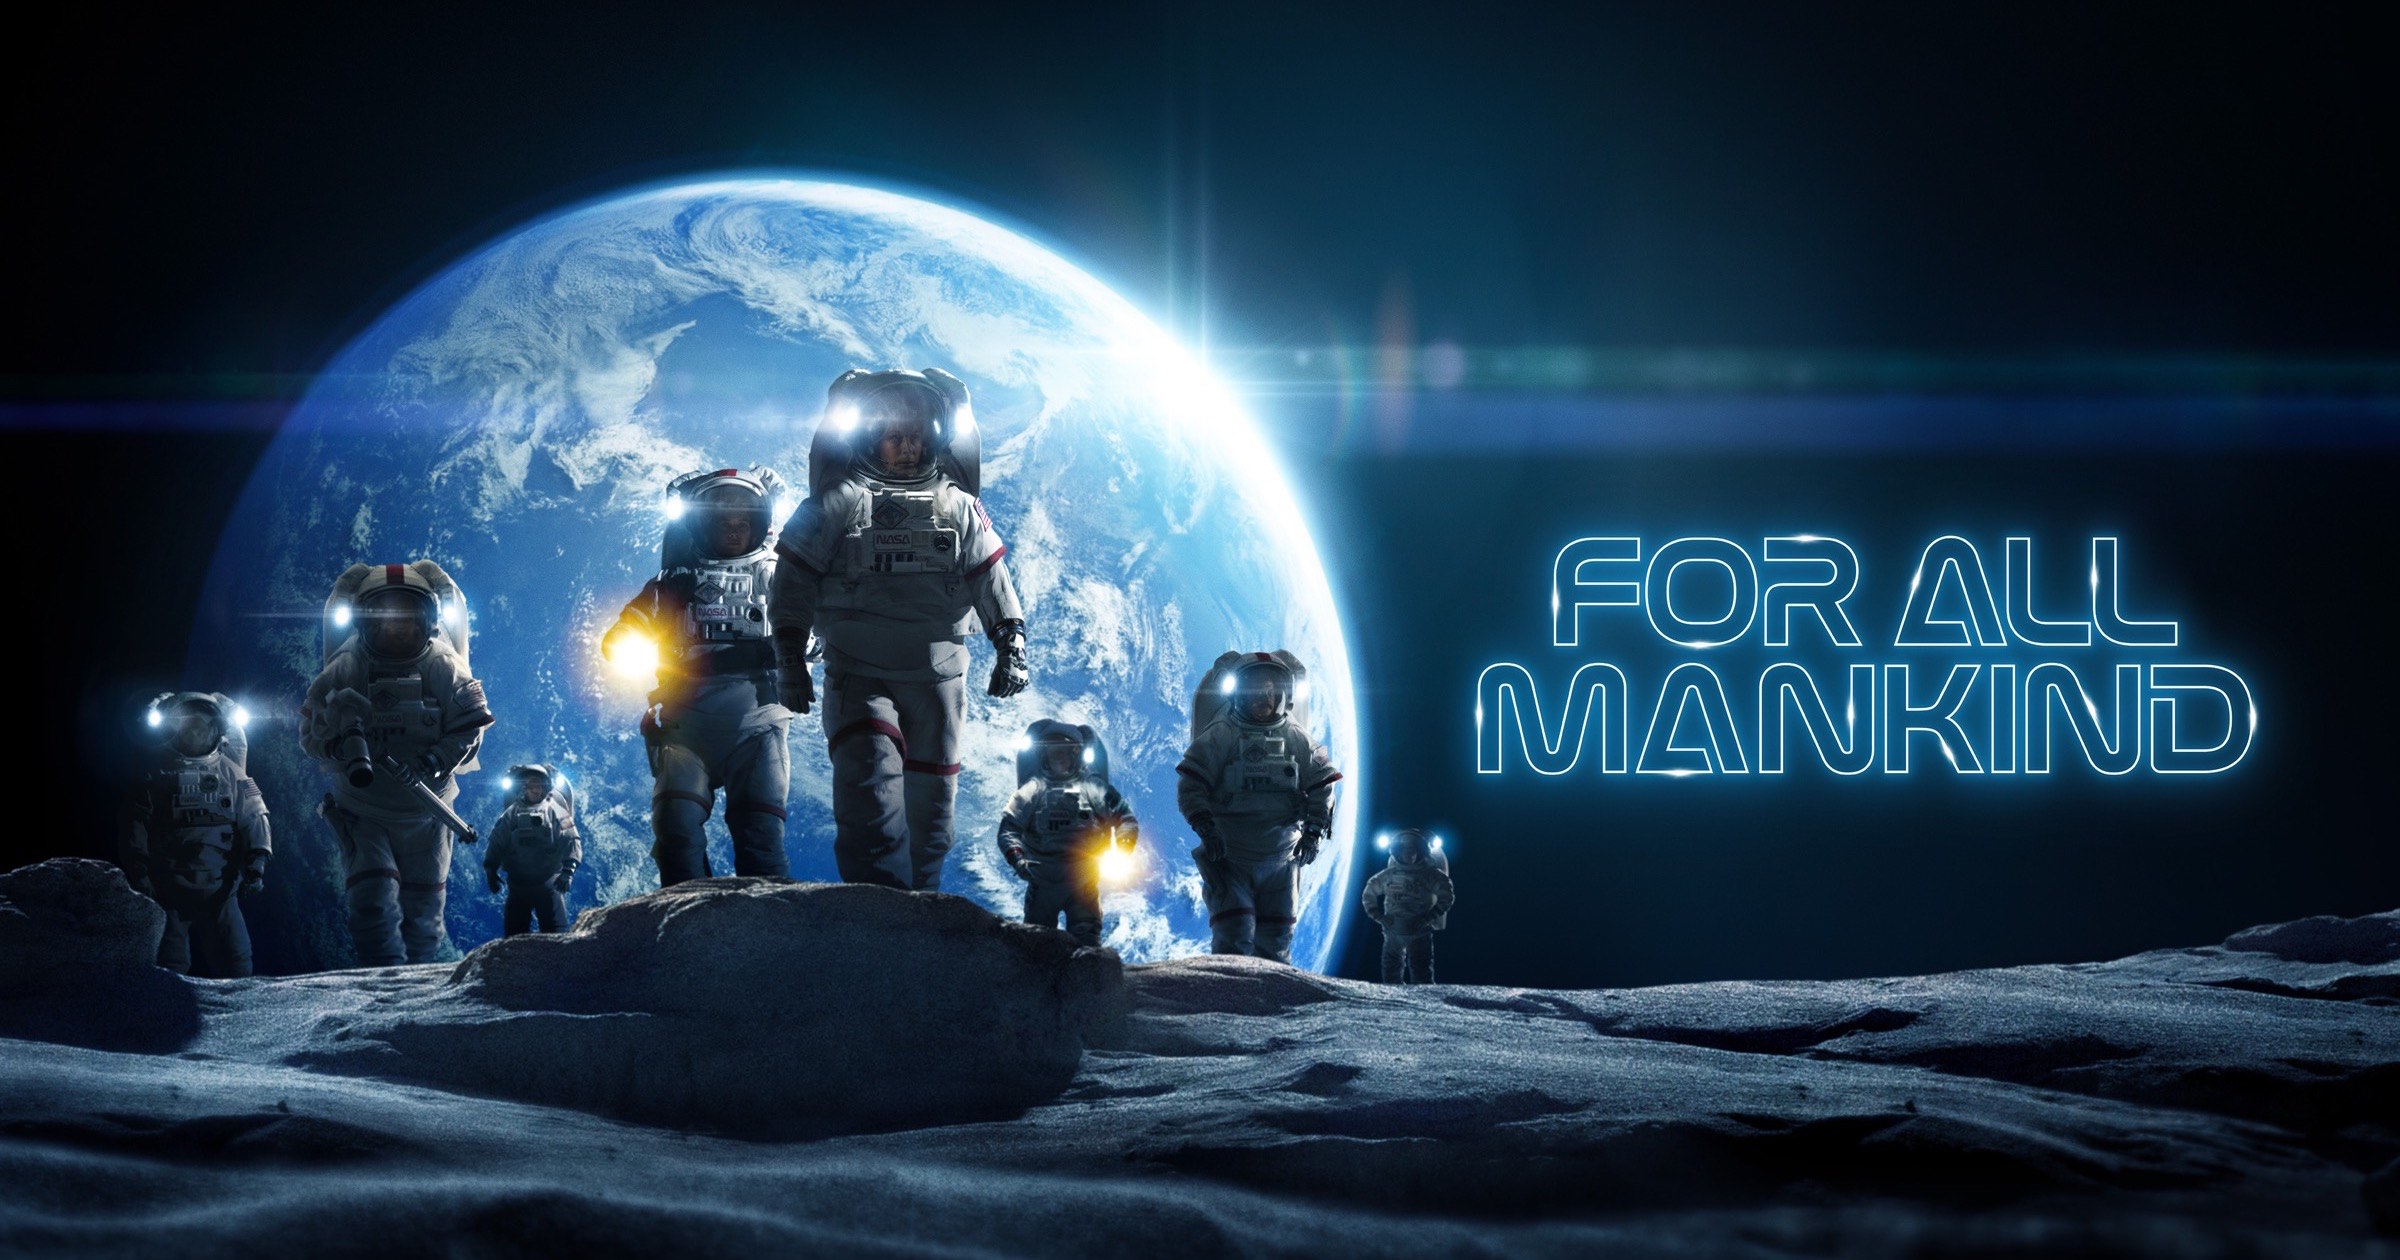 For all mankind season three poster